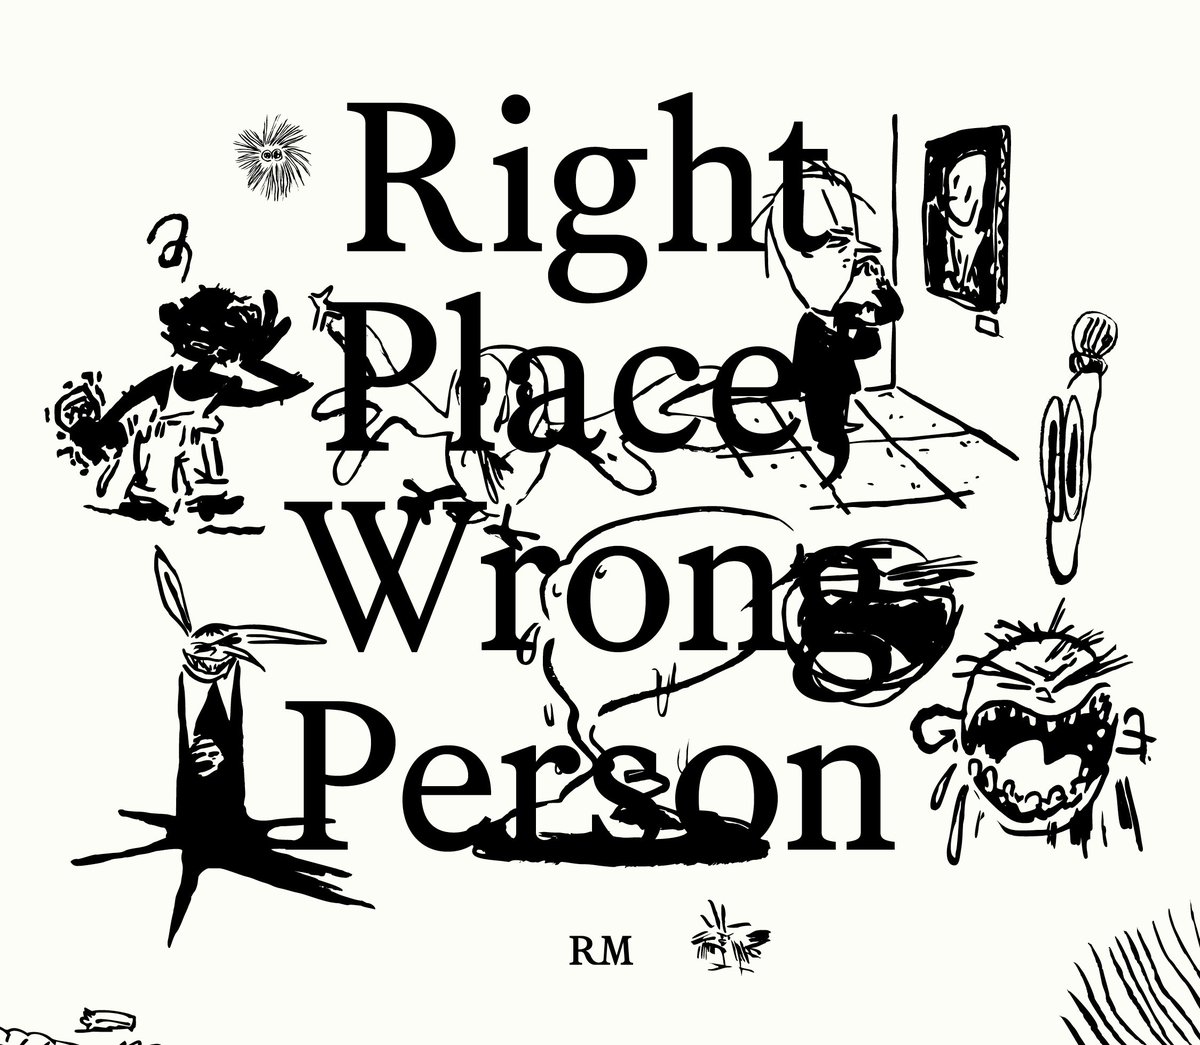 abro hilo de; RPWP CONCEPT PHOTO 3 RM IS COMING RPWP IS COMING #RightPlaceWrongPerson